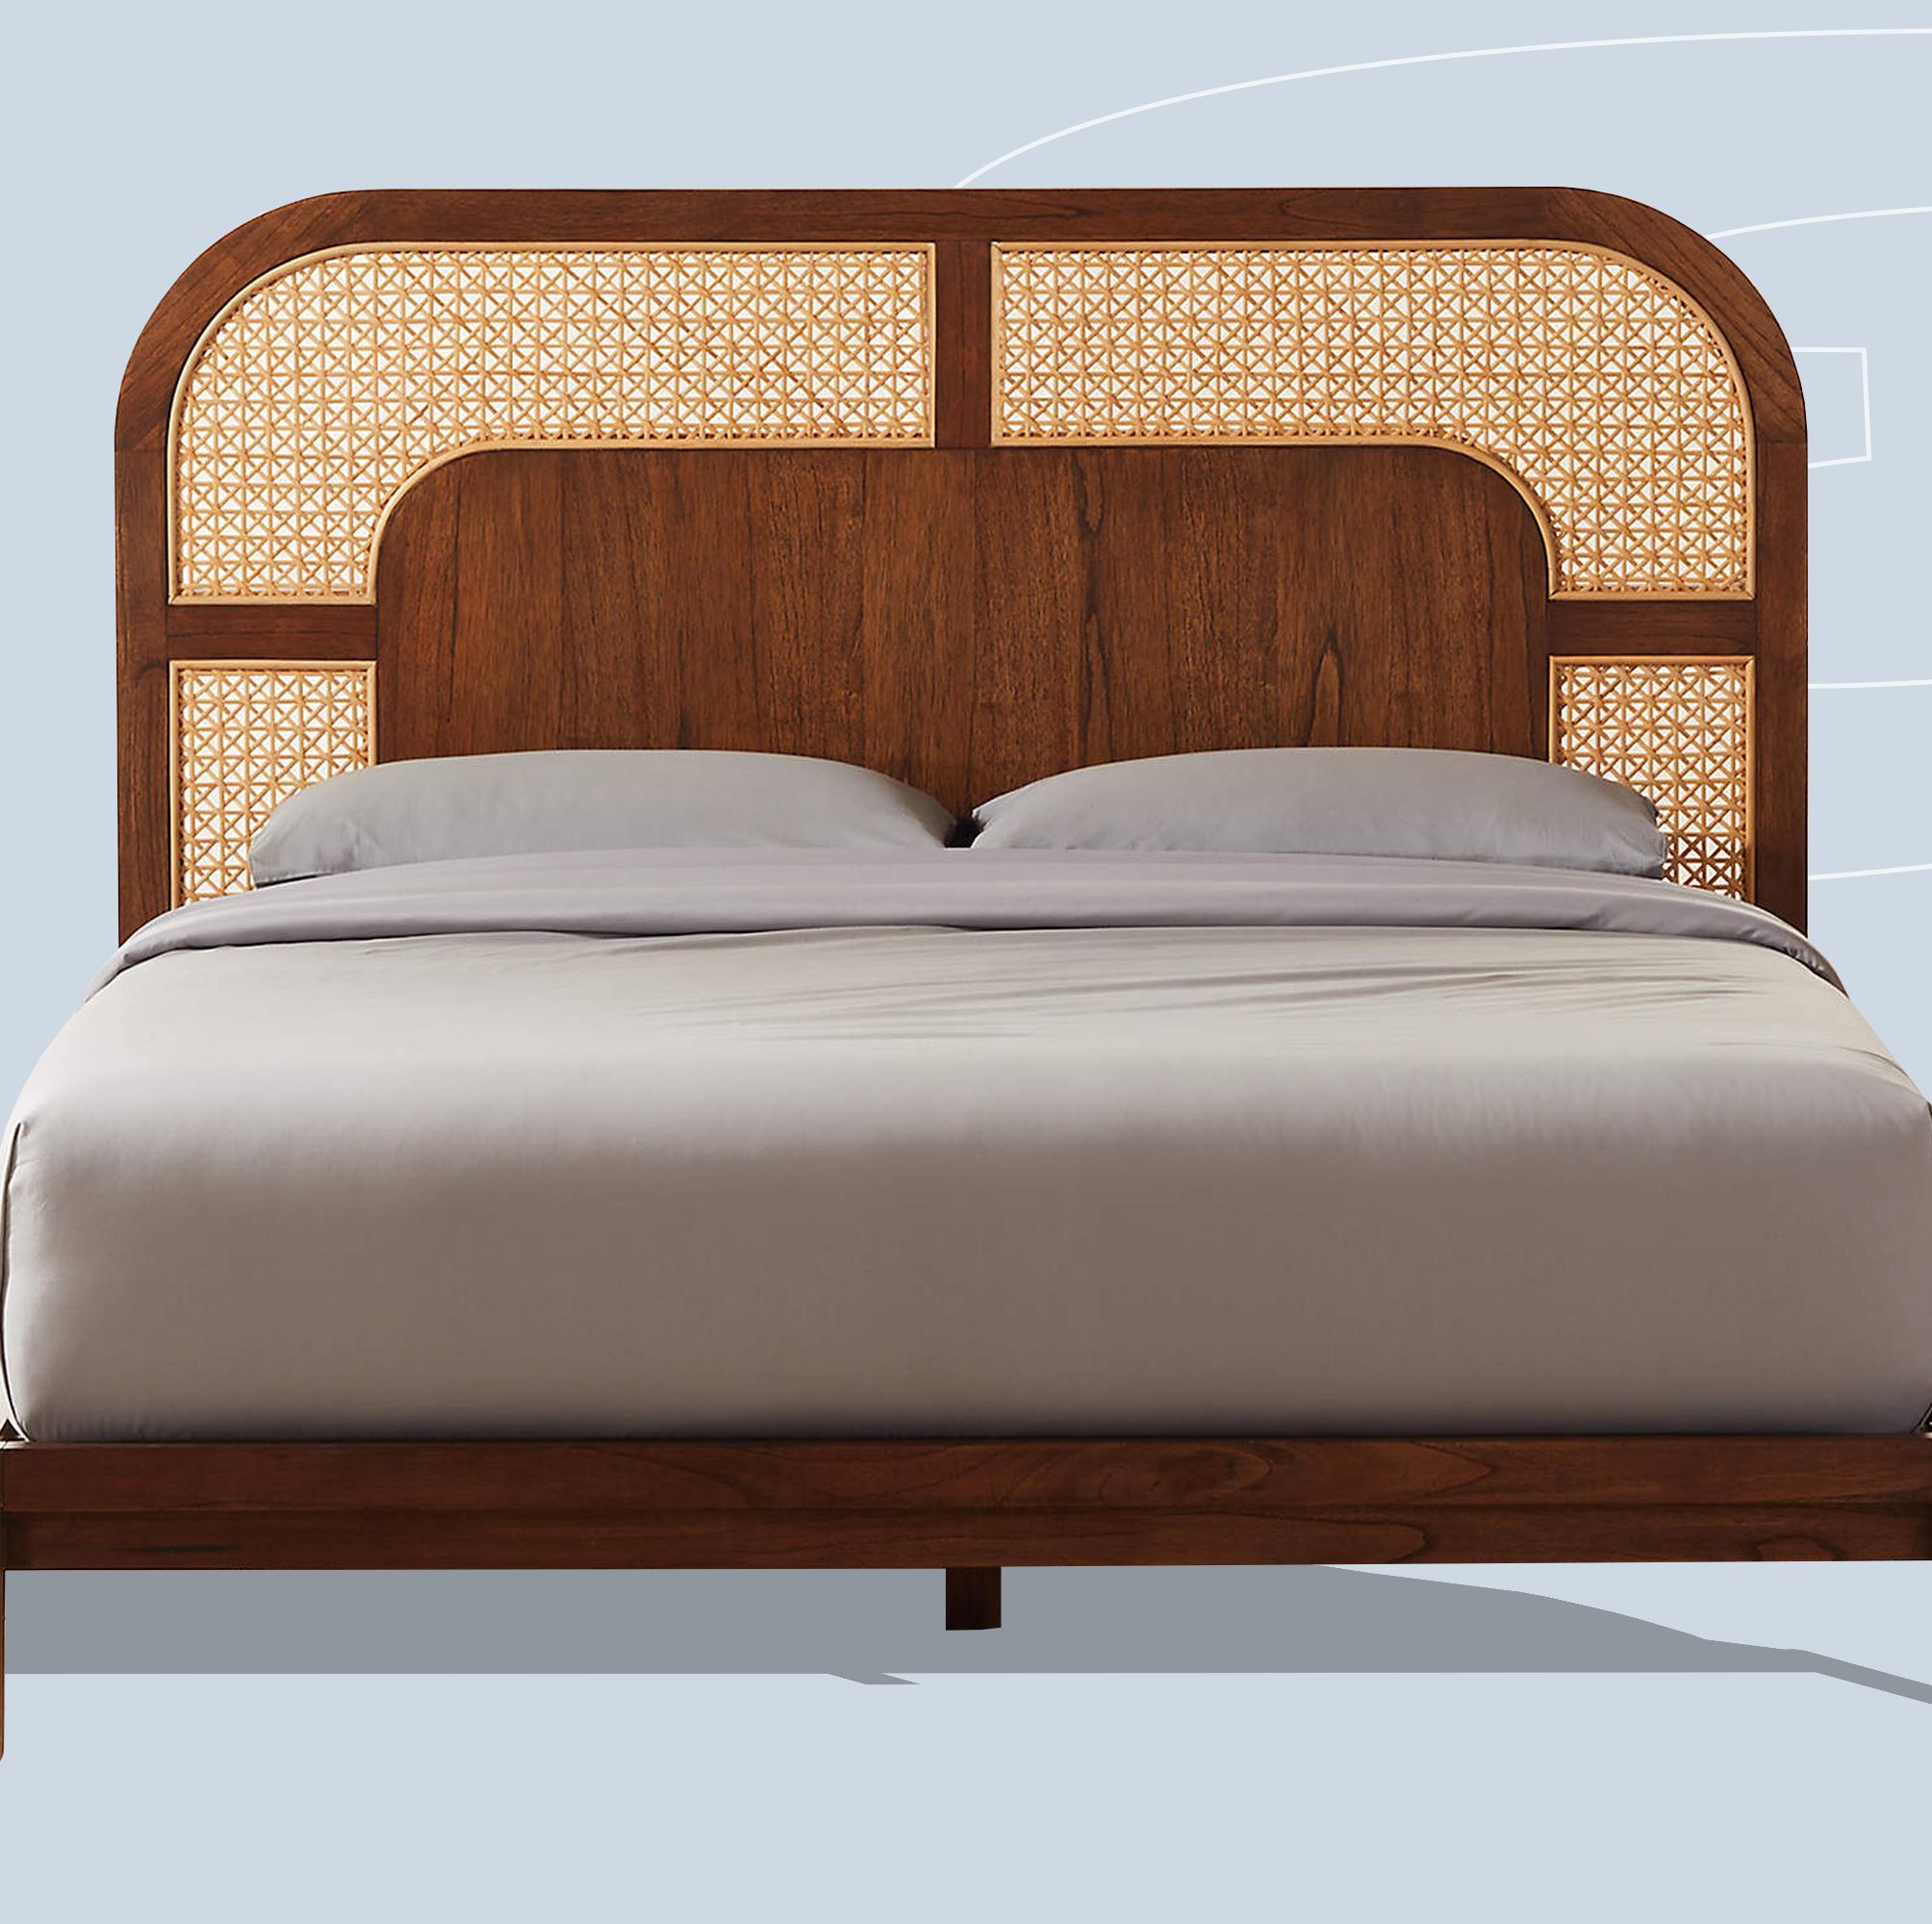 5 Bed Frames Built, Tested, and Approved by Esquire Editors